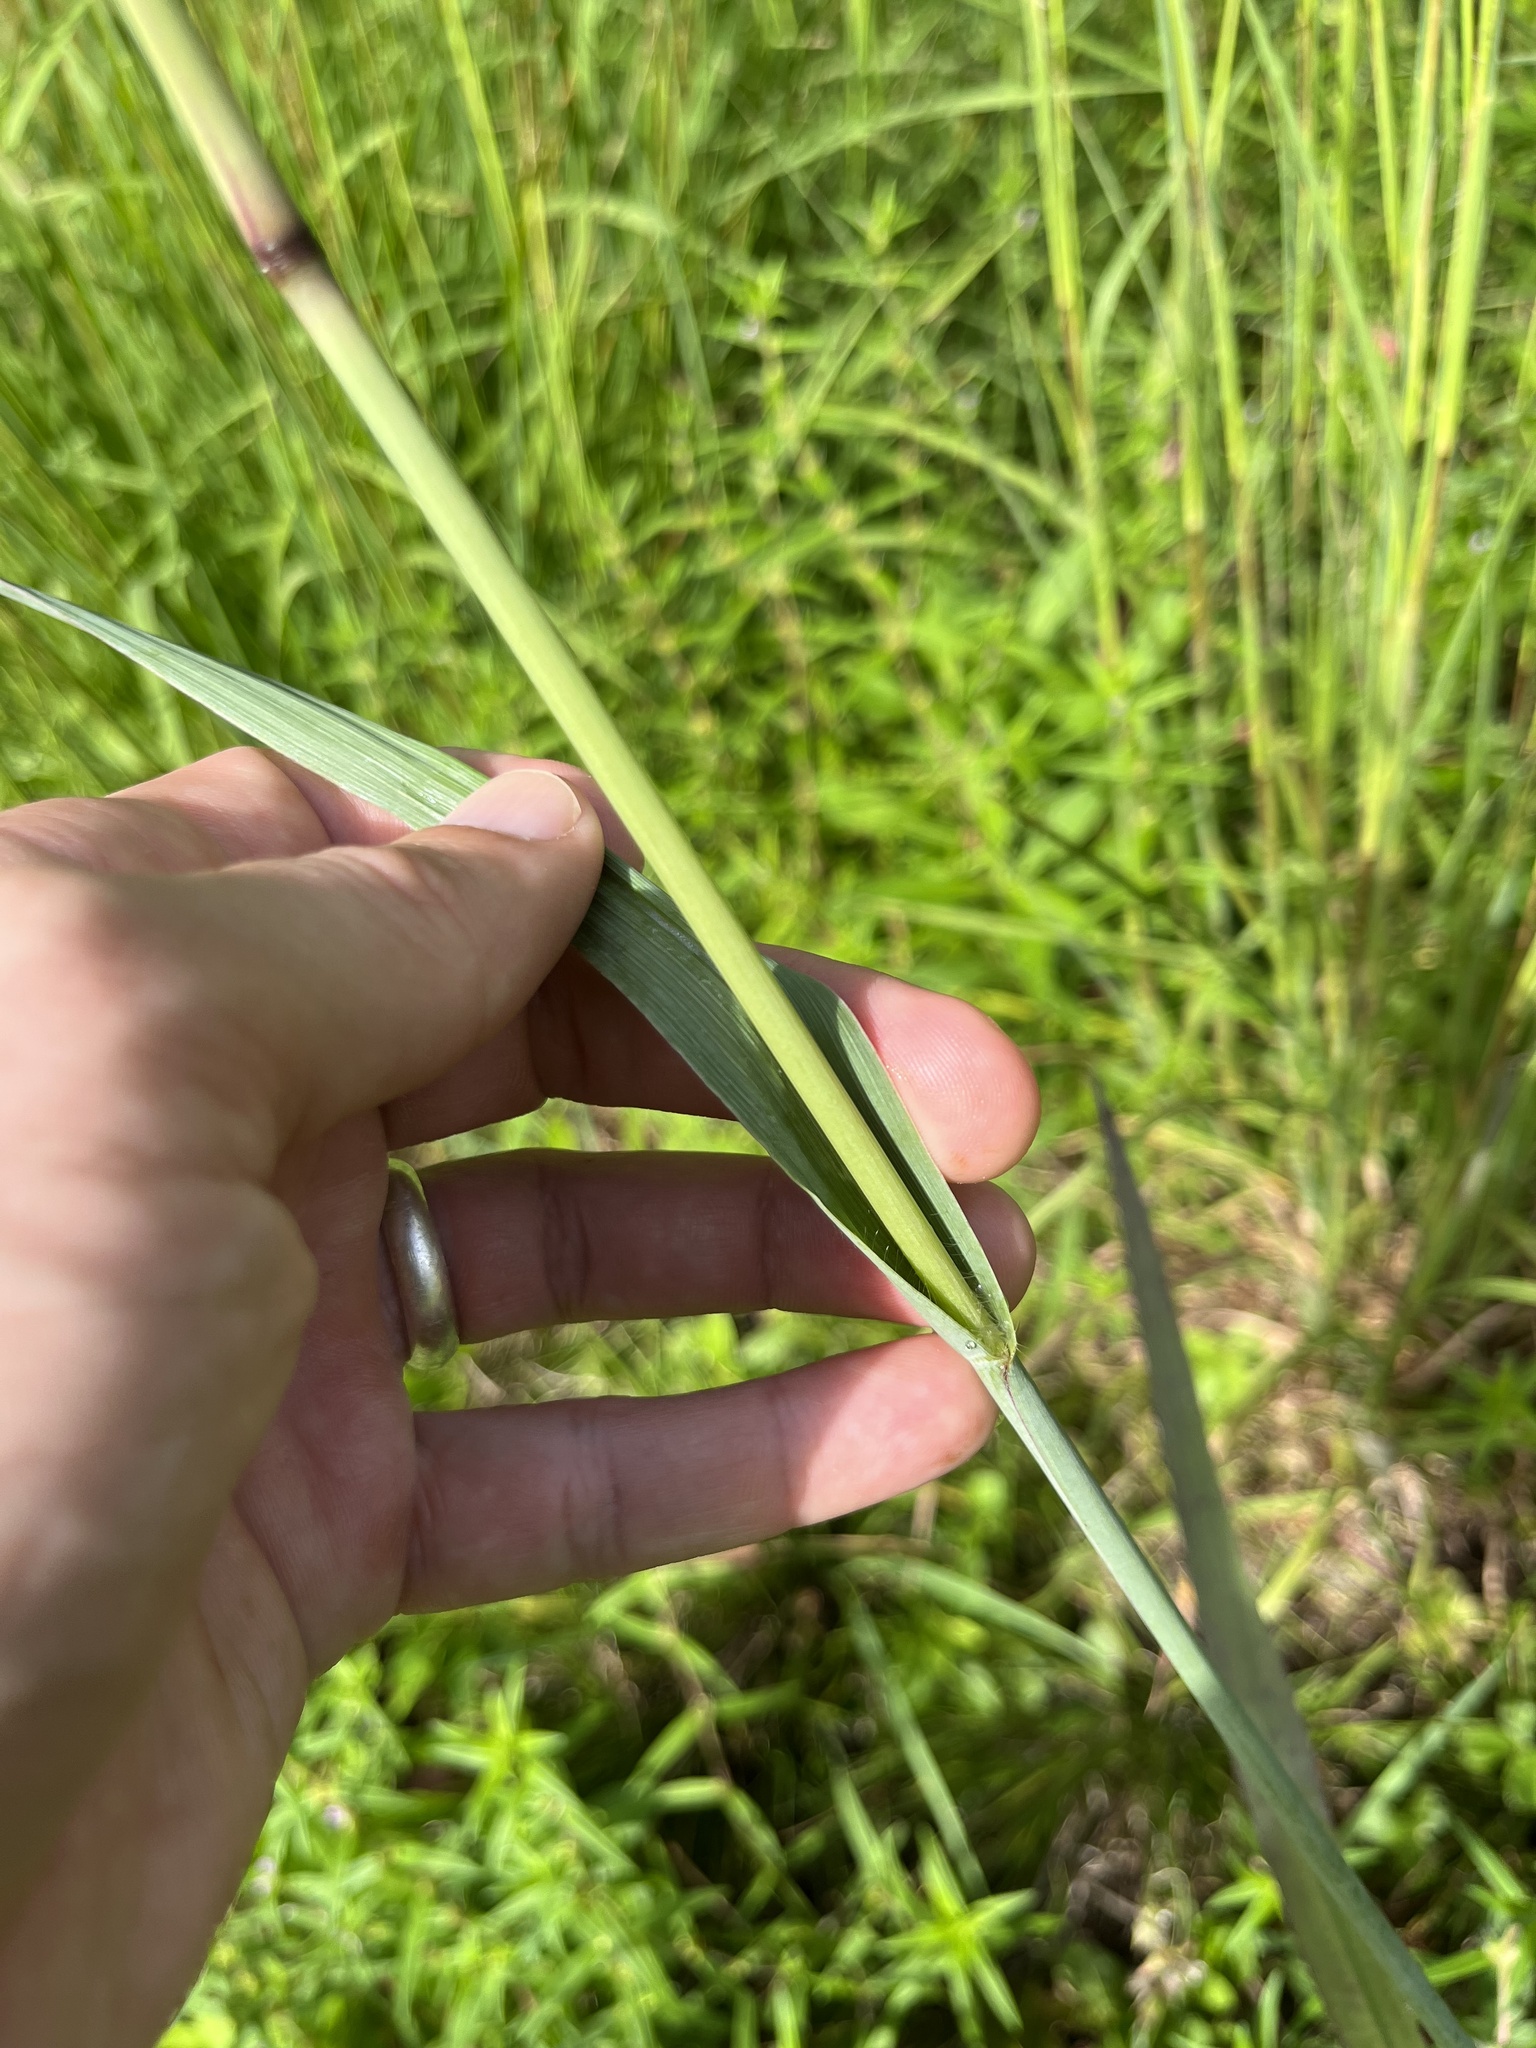 The Scientific Name is Paspalum floridanum. You will likely hear them called Florida Paspalum, Crowngrass. This picture shows the  of Paspalum floridanum